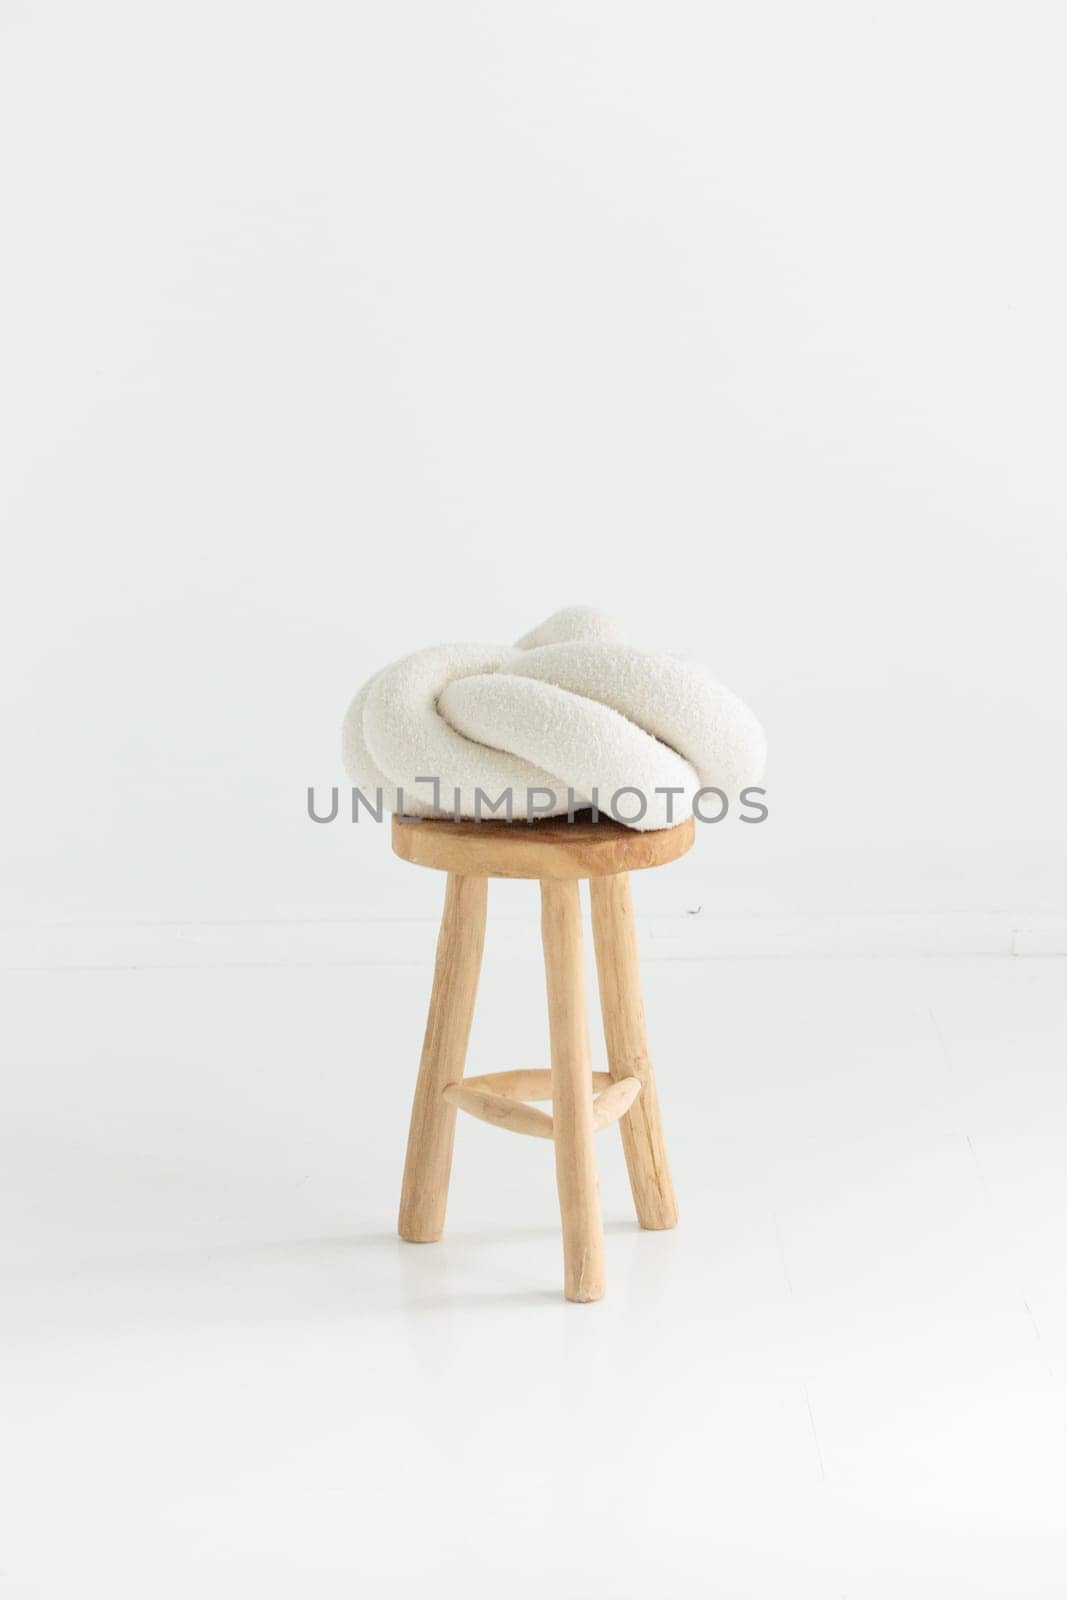 Wooden handcraft chair with a white background